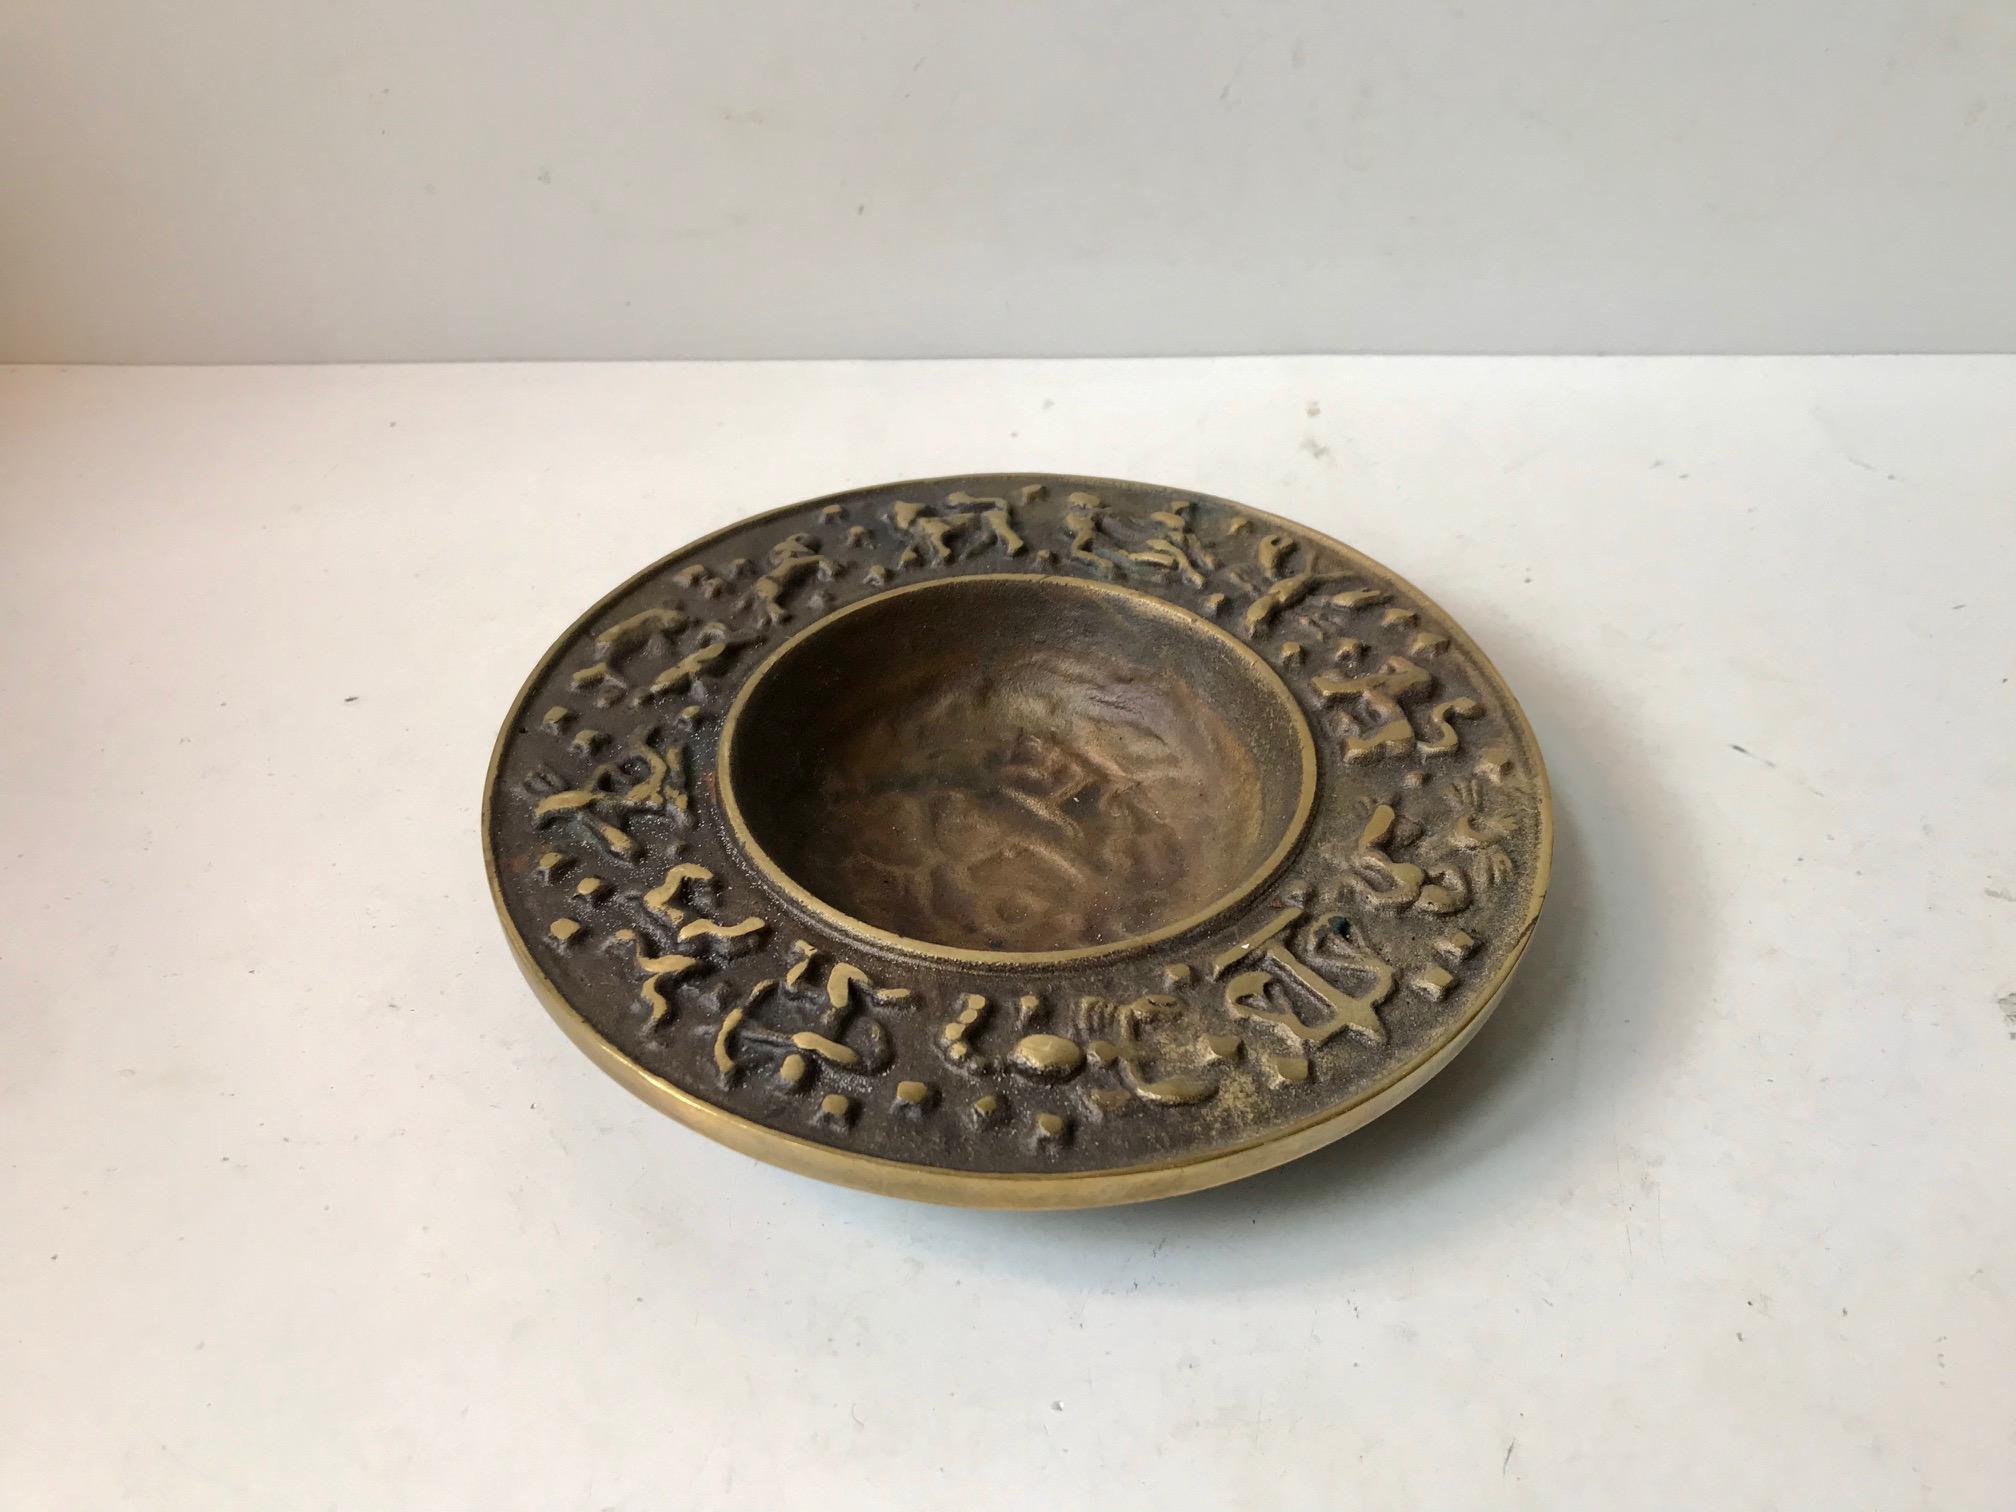 Bronze bowl/dish/ashtray with Zodiac motifs, manufactured and designed by Nordisk Malm in Denmark in the late 1940s